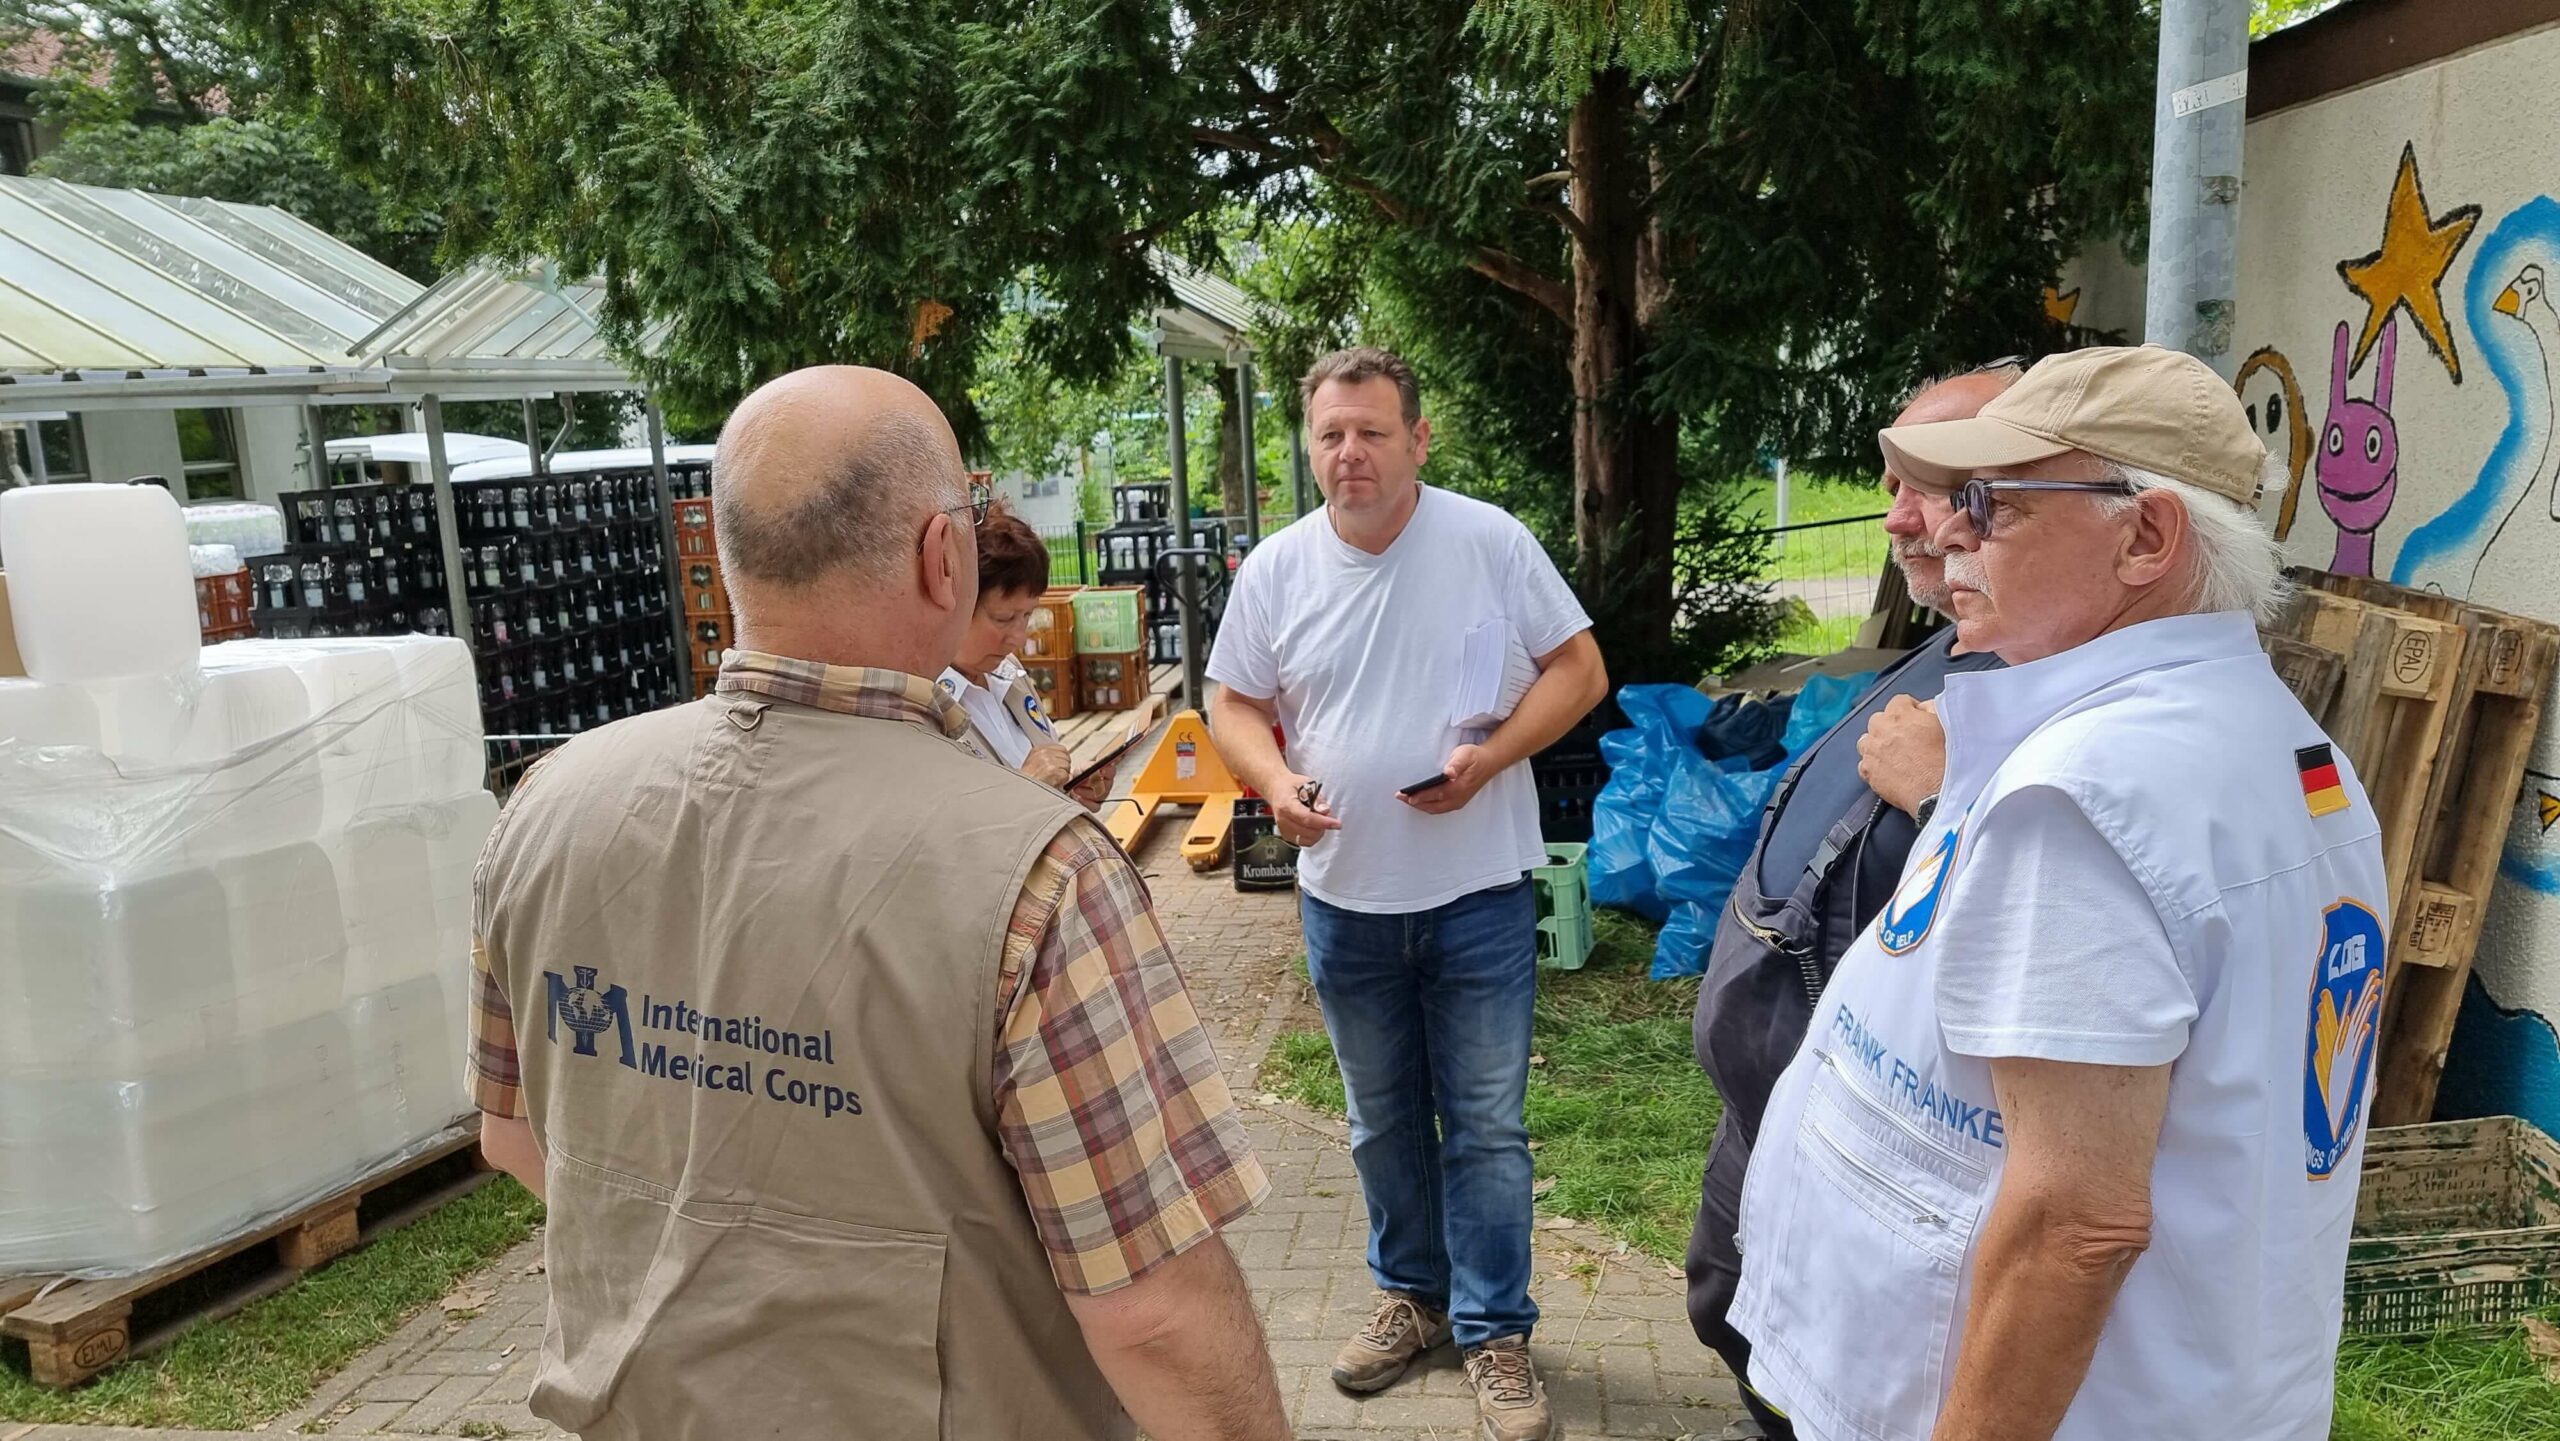 Initial coordination with Mayor of Bad Bodendorf - Mr. Alexandar Albrecht and Deputy Head of Fireman Station - Mr. Dirk Schwarz, primary contact on behalf of affected community of Bad Bodendorf, with Frank Franke, President and CEO for Luftfahrt ohne Grenzen, Marie Louise Thune (LoG) and Marin Tomas (International Medical Corps).